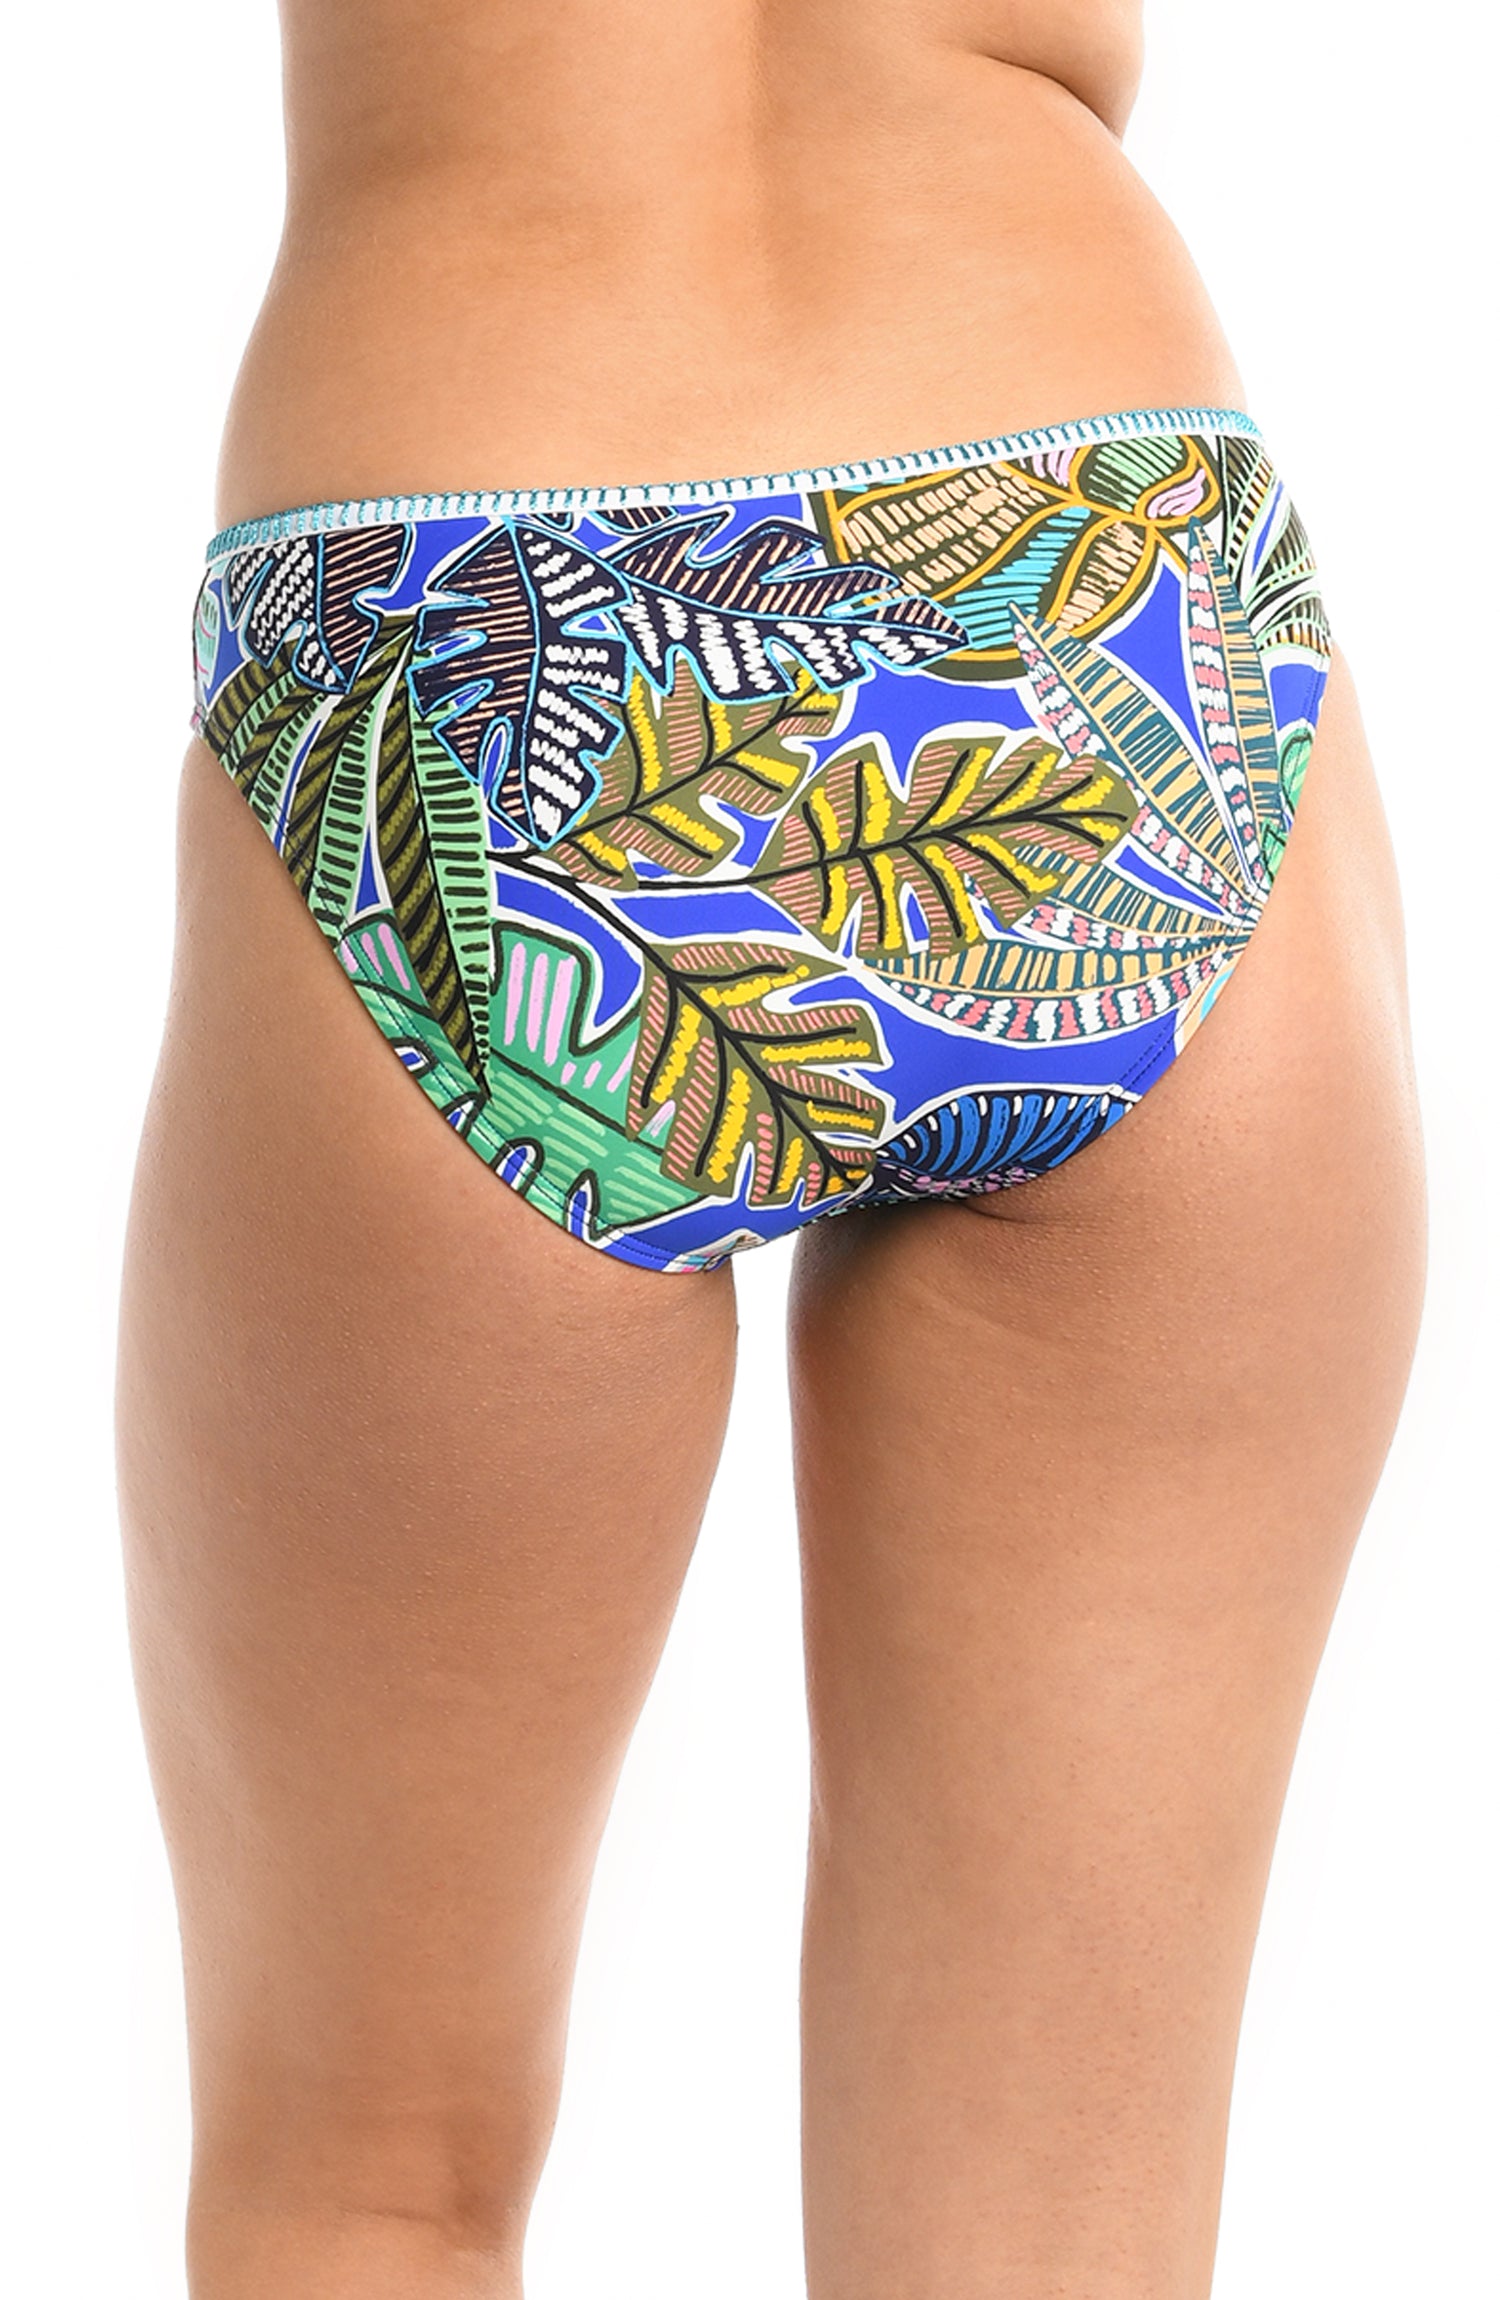 Model is wearing a neon colored tropical printed hipster bikini bottom from our Neon Nights collection.